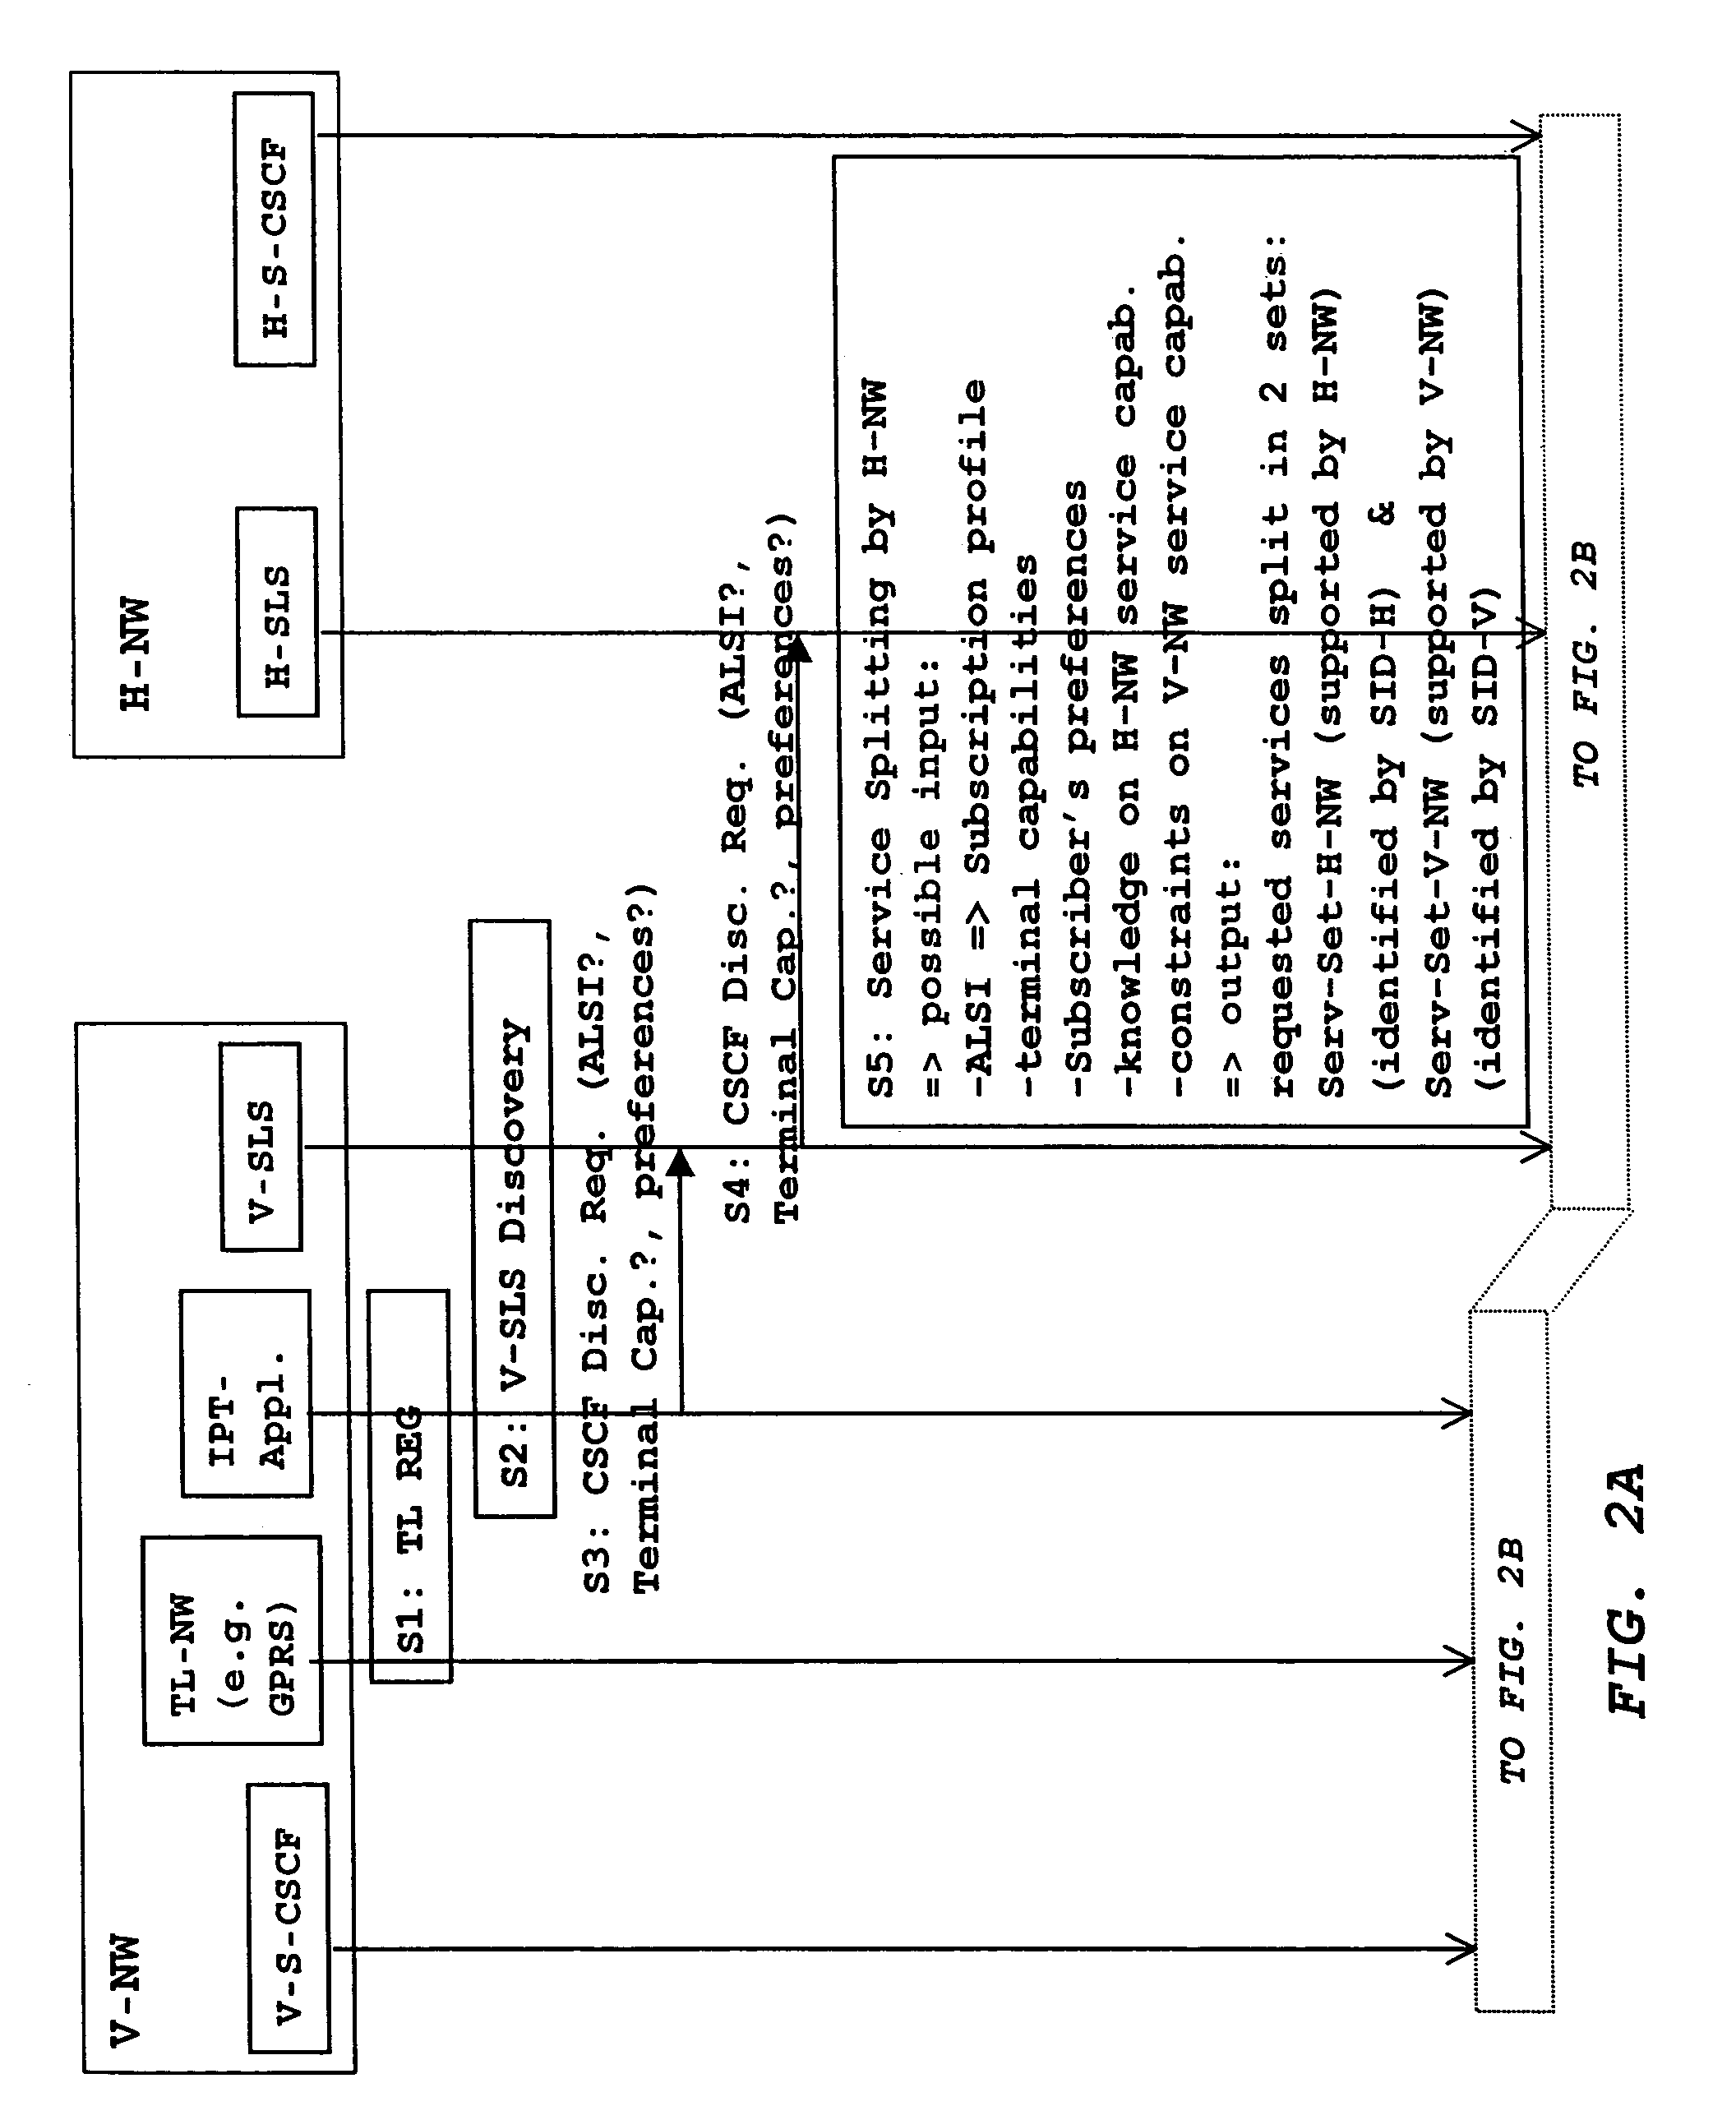 Service discovery and service partitioning for a subscriber terminal between different networks